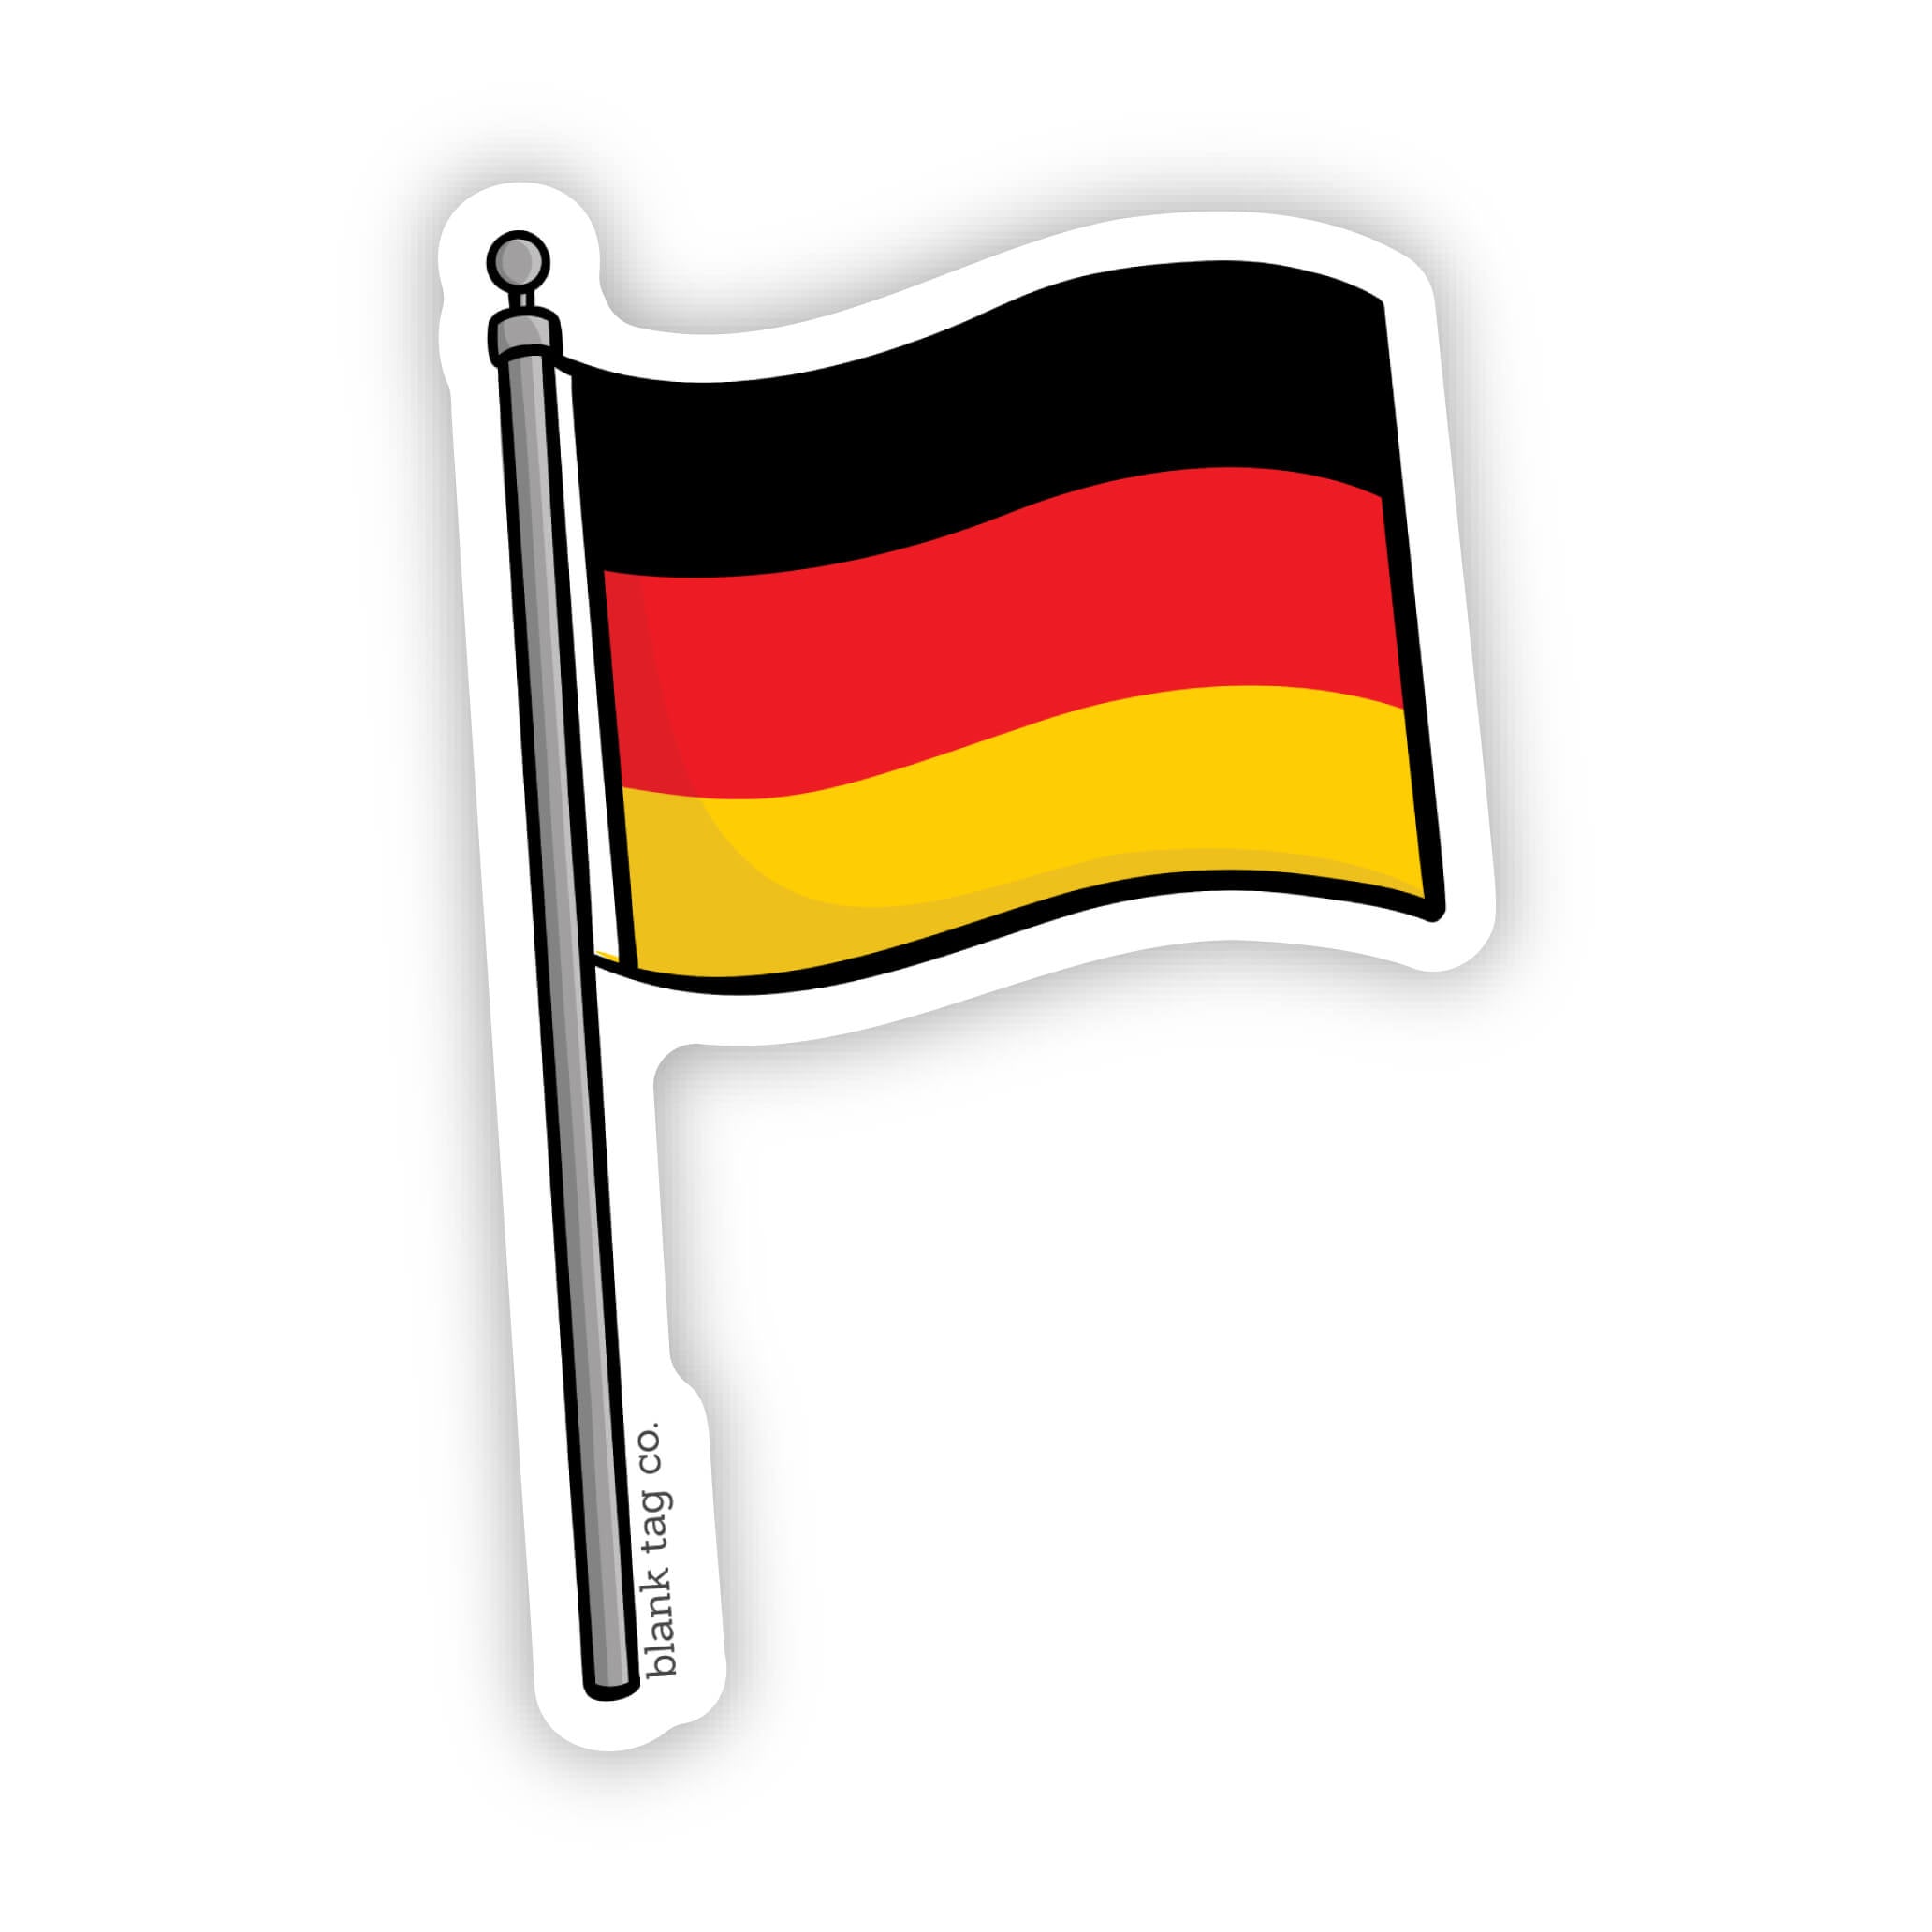 The Germany Flag Sticker